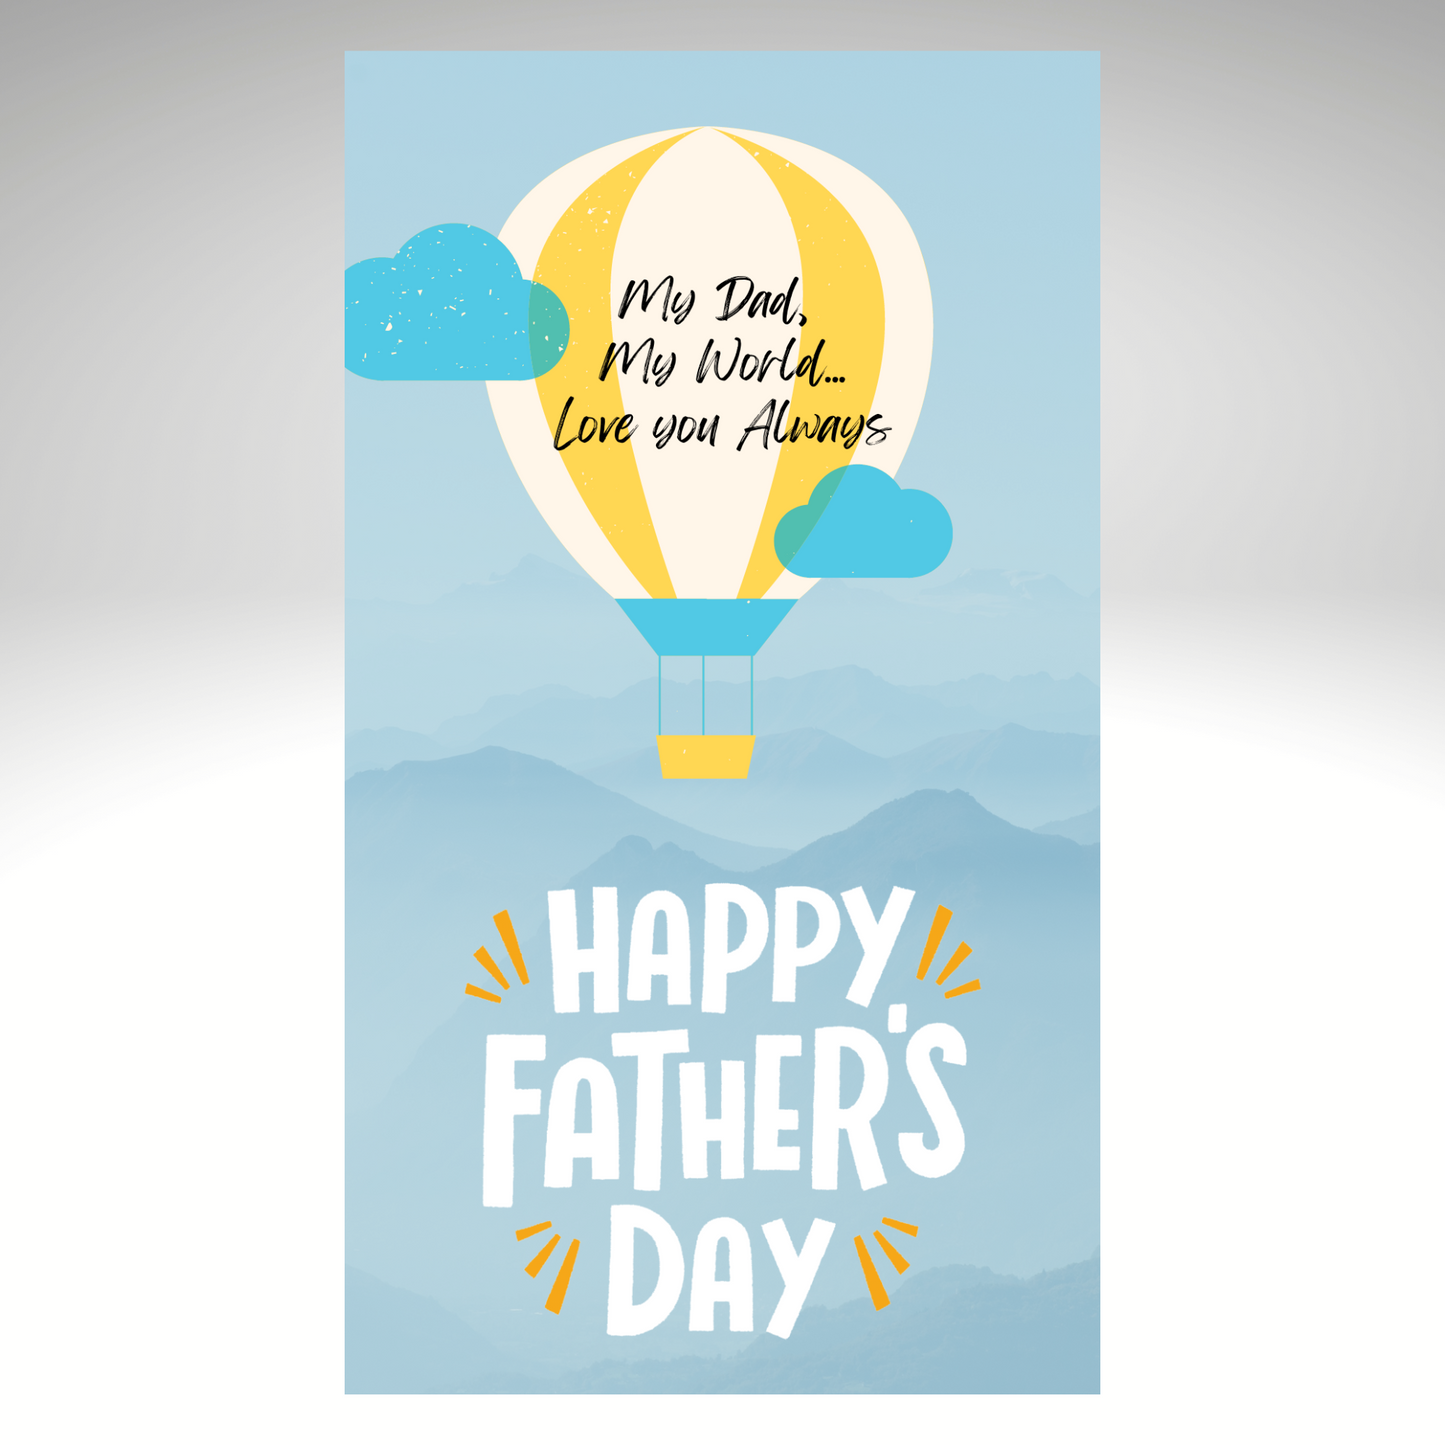 Fathers Day E-Card - Hot Air Balloon MP4 Video Message